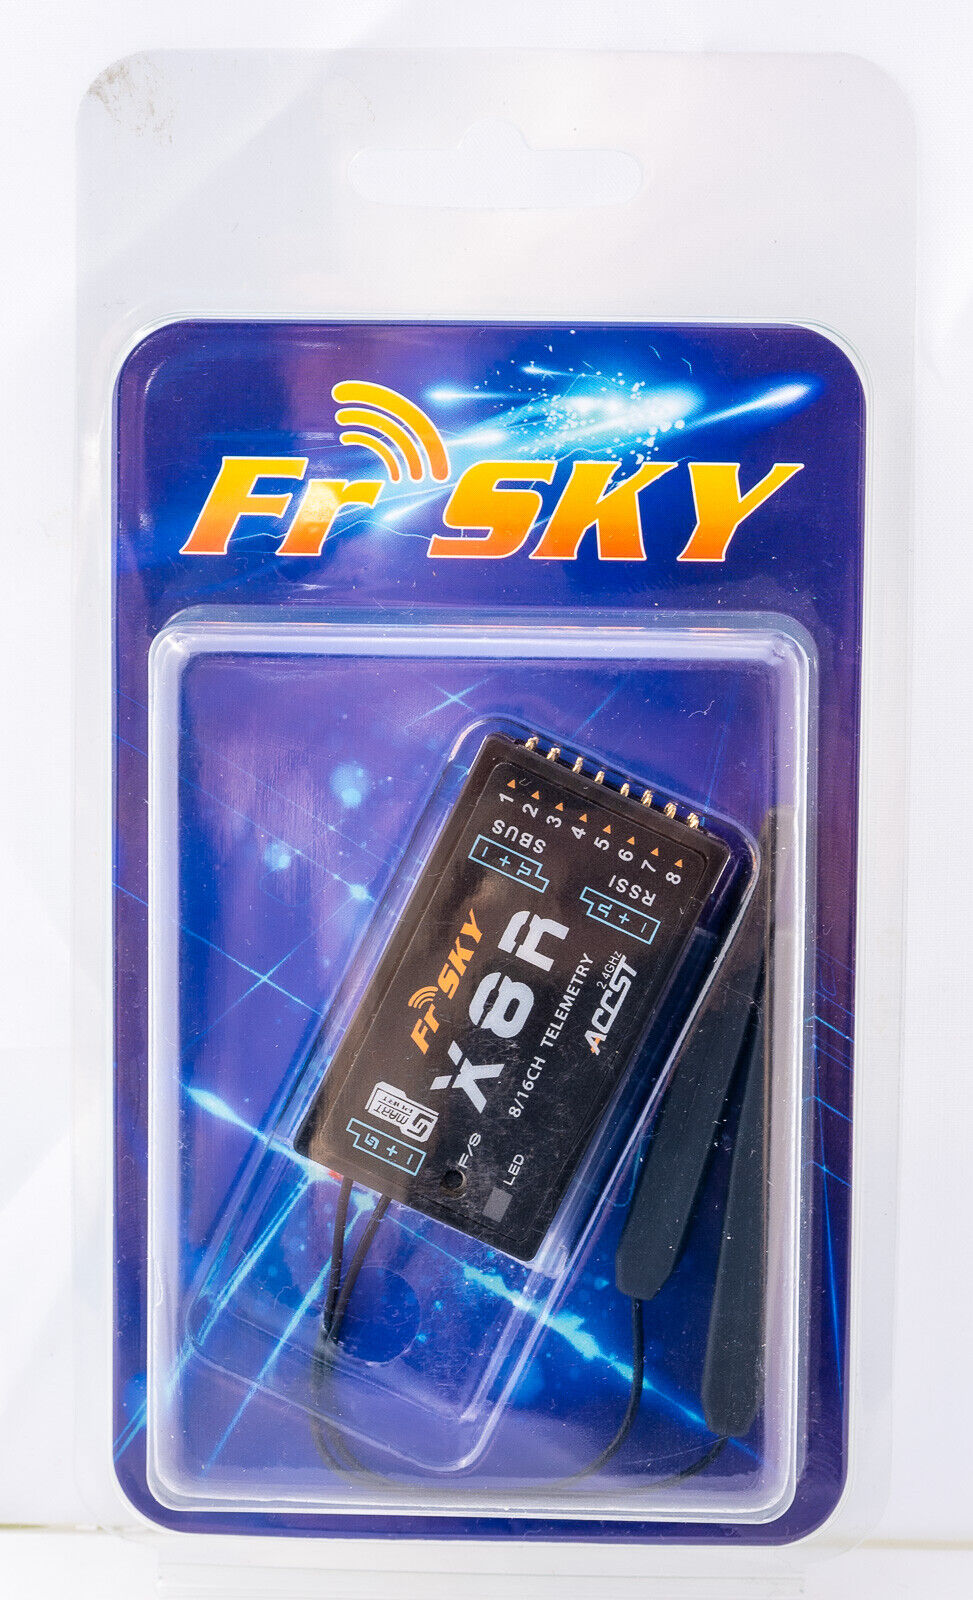 Frsky Taranis Receiver X8R 8 Channel 2.4Ghz 8/16 Channel with Telemetry